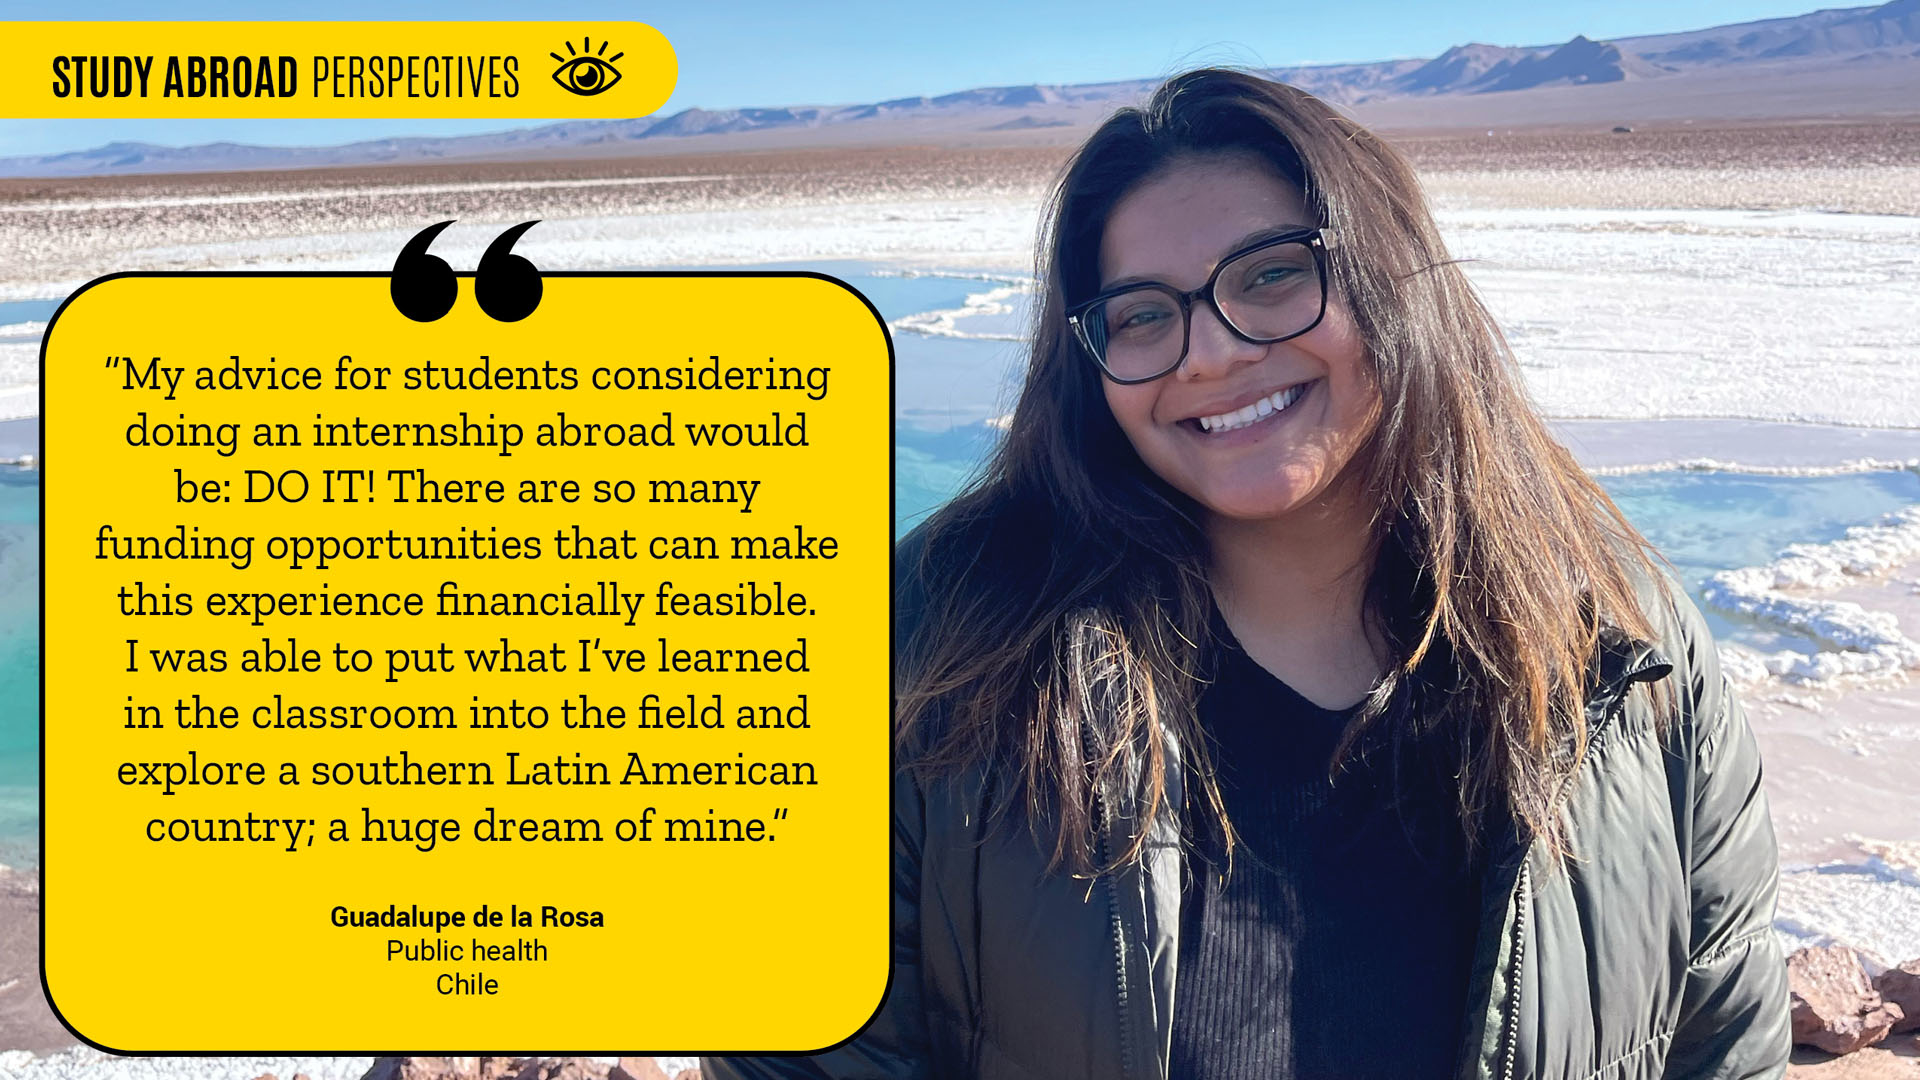 Guadalupe de la Rosa, a public health student, is quoted about her experience studying in Chile and encouragement for students to do complete an internship abroad.